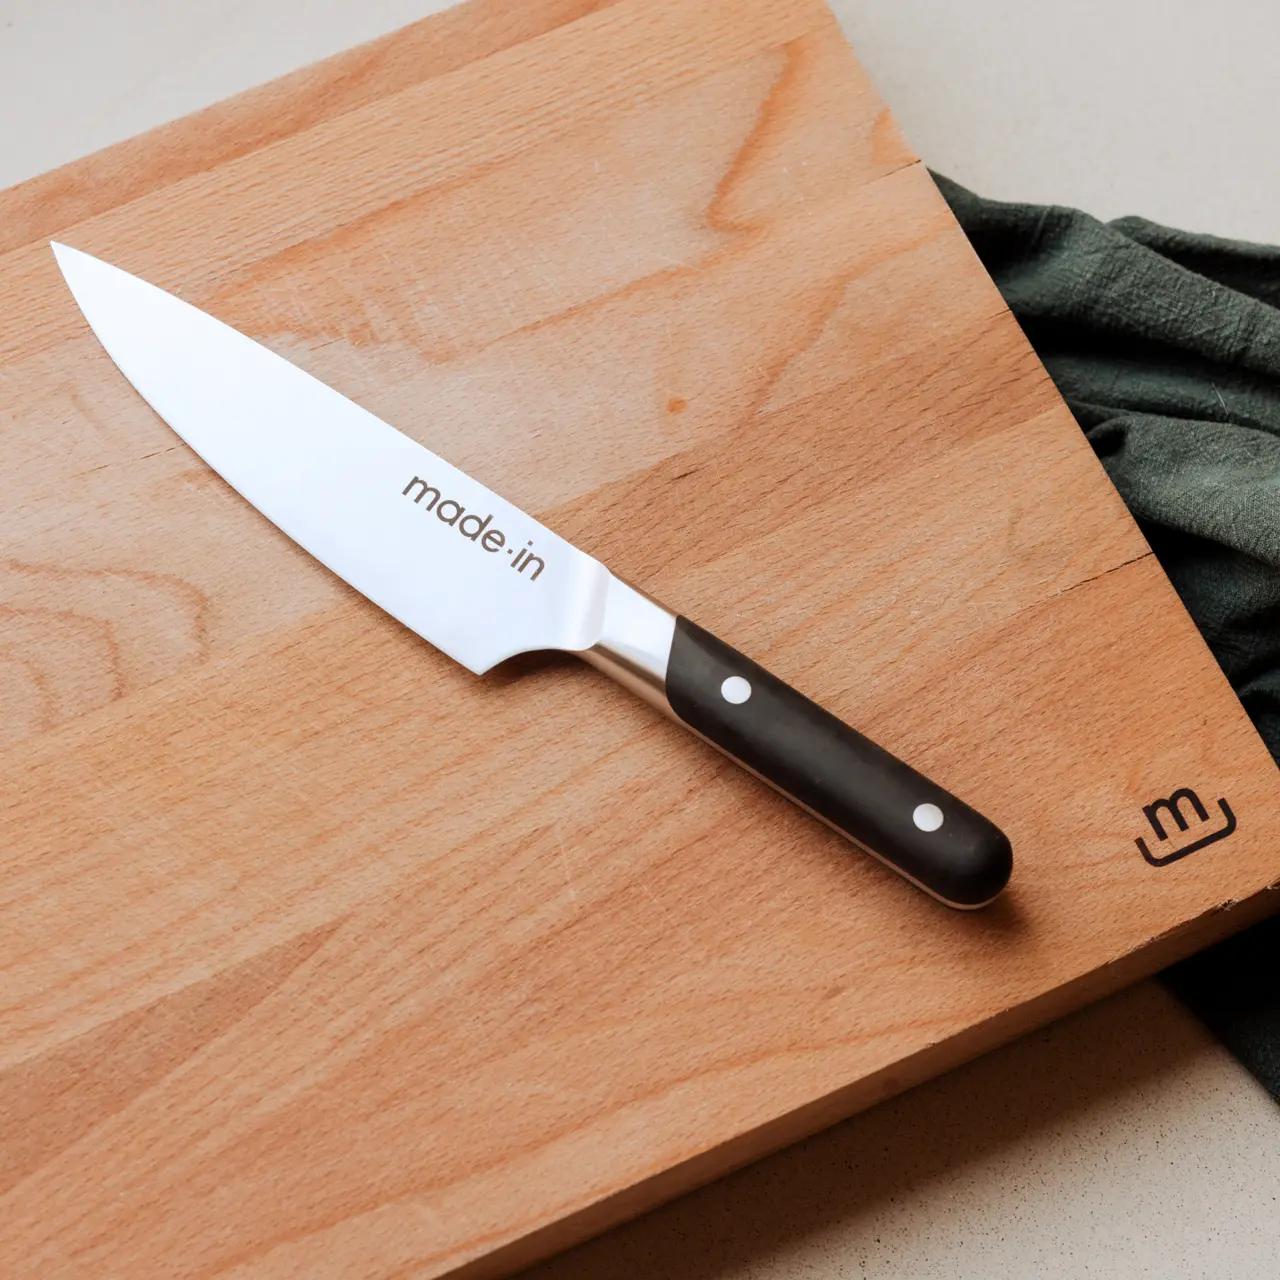 A chef's knife with a black handle lies on a wooden cutting board next to a dark green cloth.